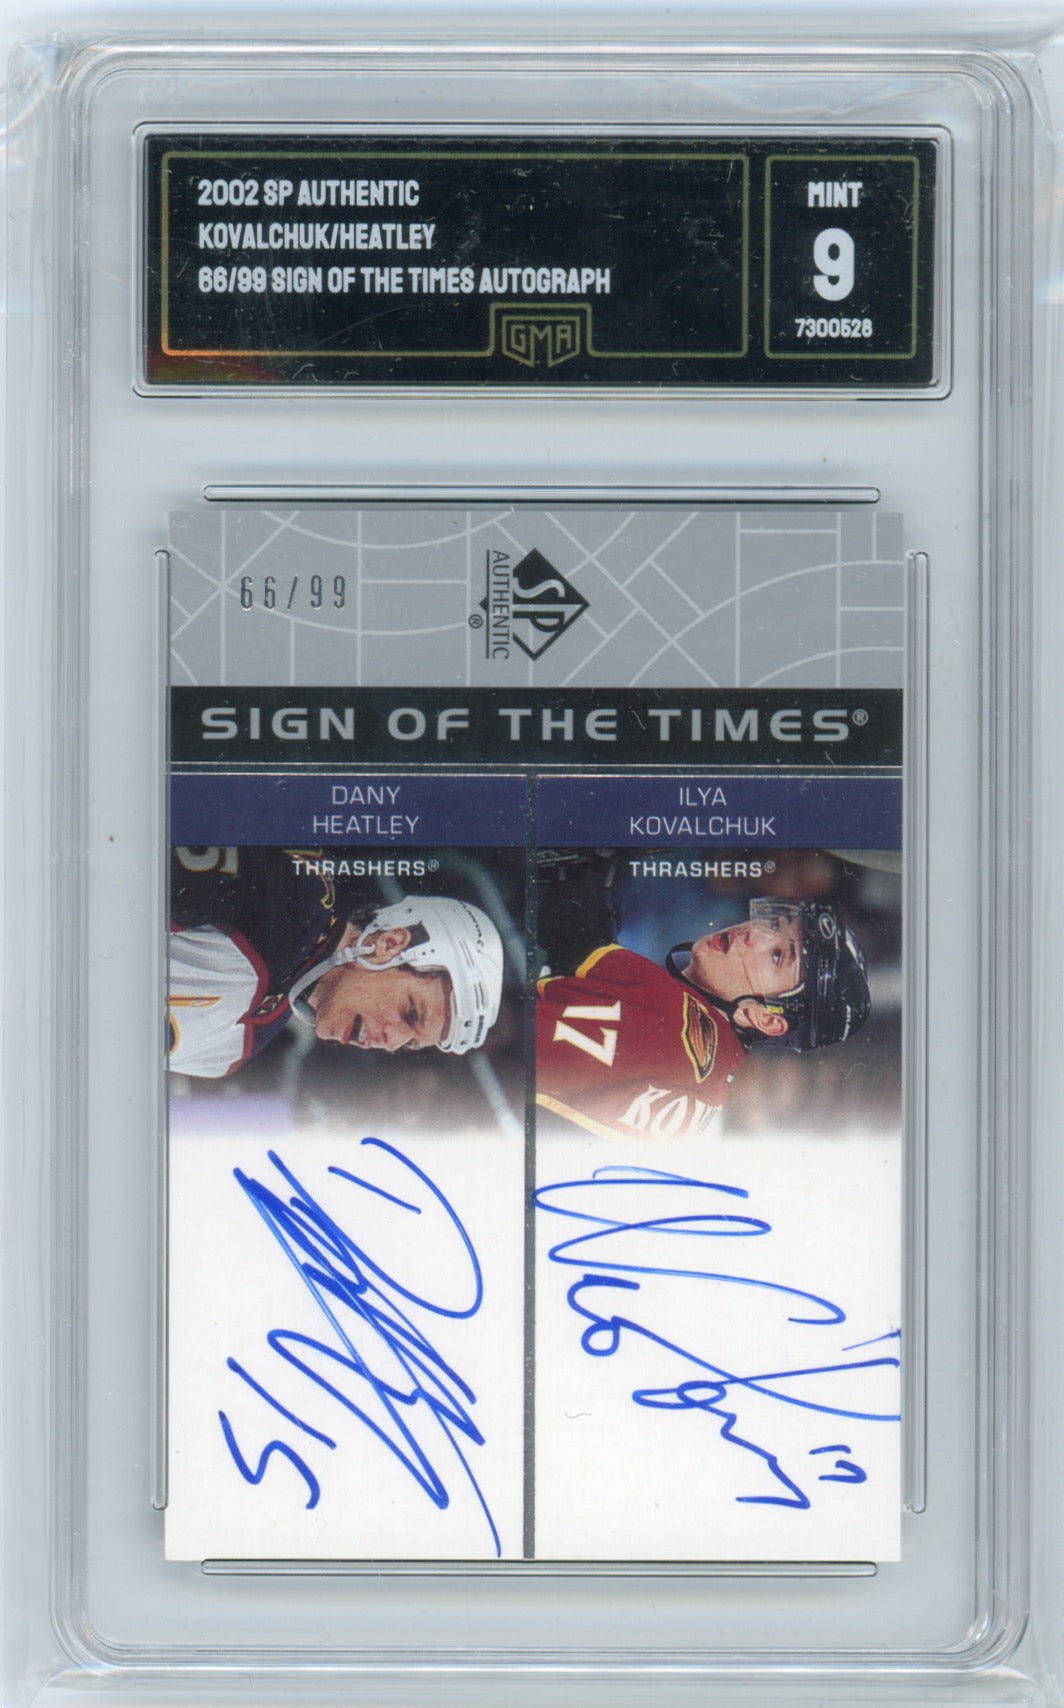 2002 SP Authentic Kovalchuck/Heatley 66/99 Sign Of The Times Autograph GMA 9